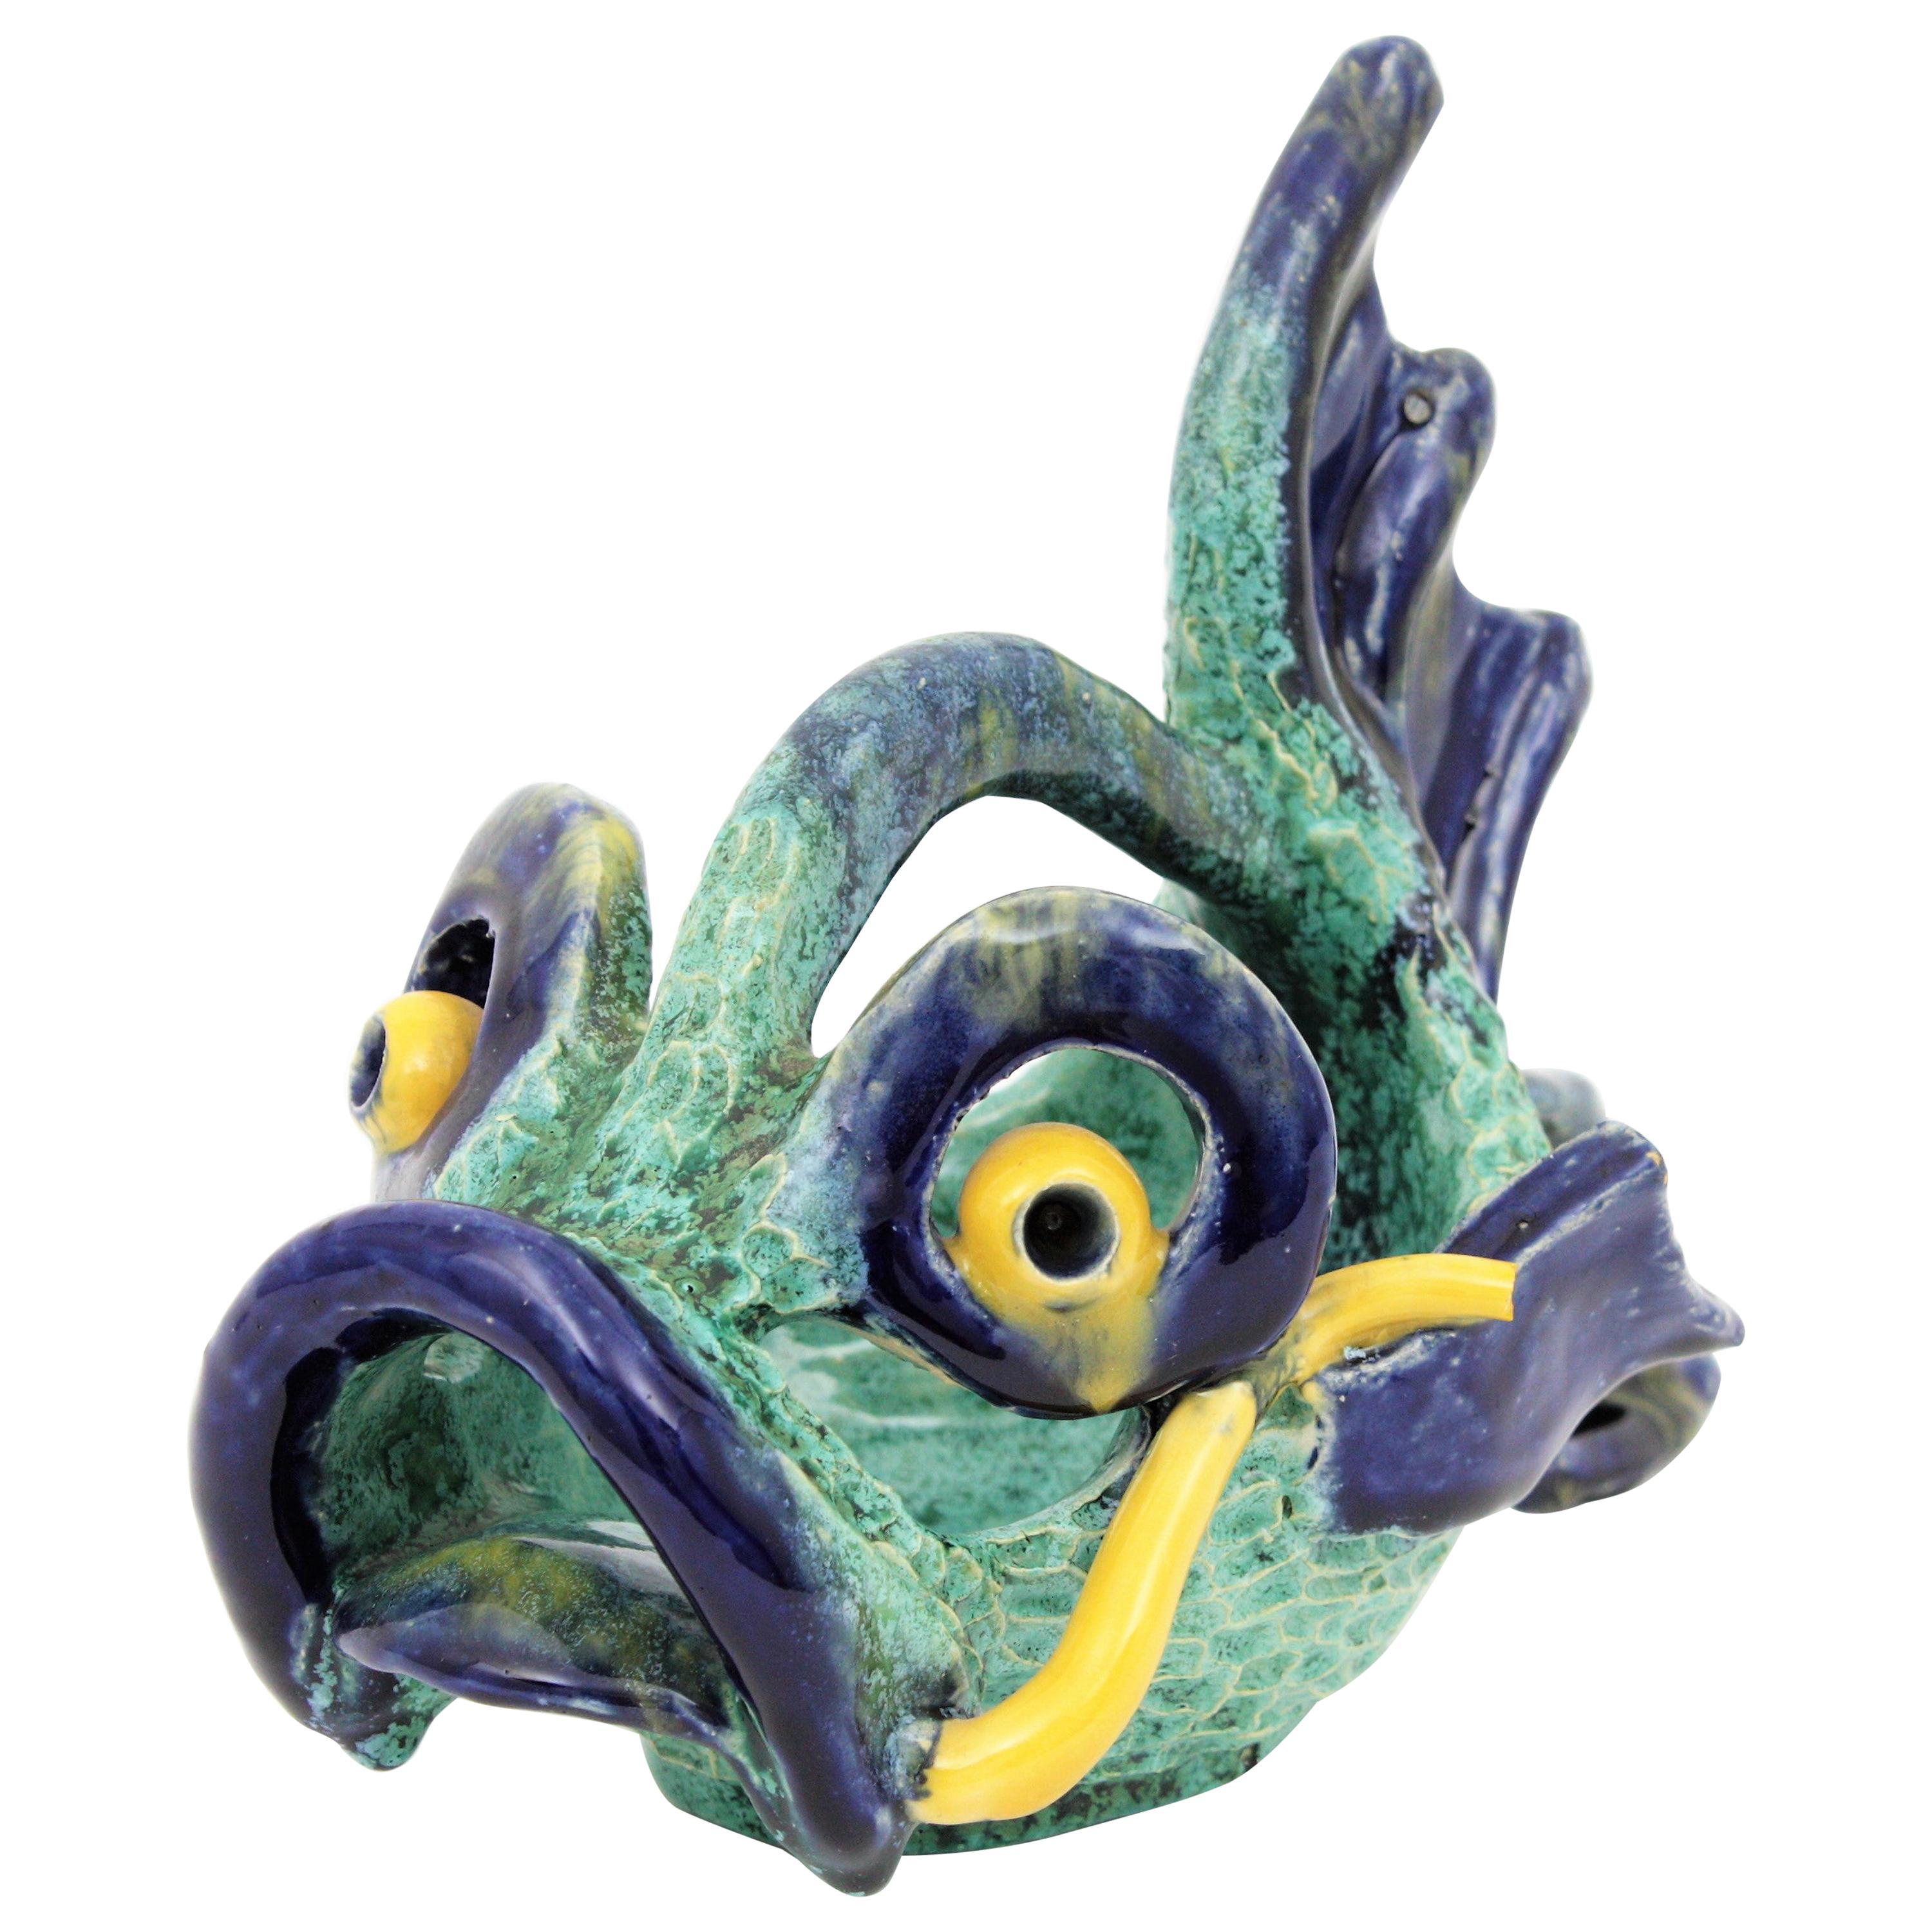 Funny glazed ceramic fish shaped bowl or vide-poche fish sculpture, Italy, 1950s.
This eye-catching fish figure sculpture / bowl has a beautiful design with yellow and navy blue accents on turquoise green / blue as the predominant color.
Lovely to